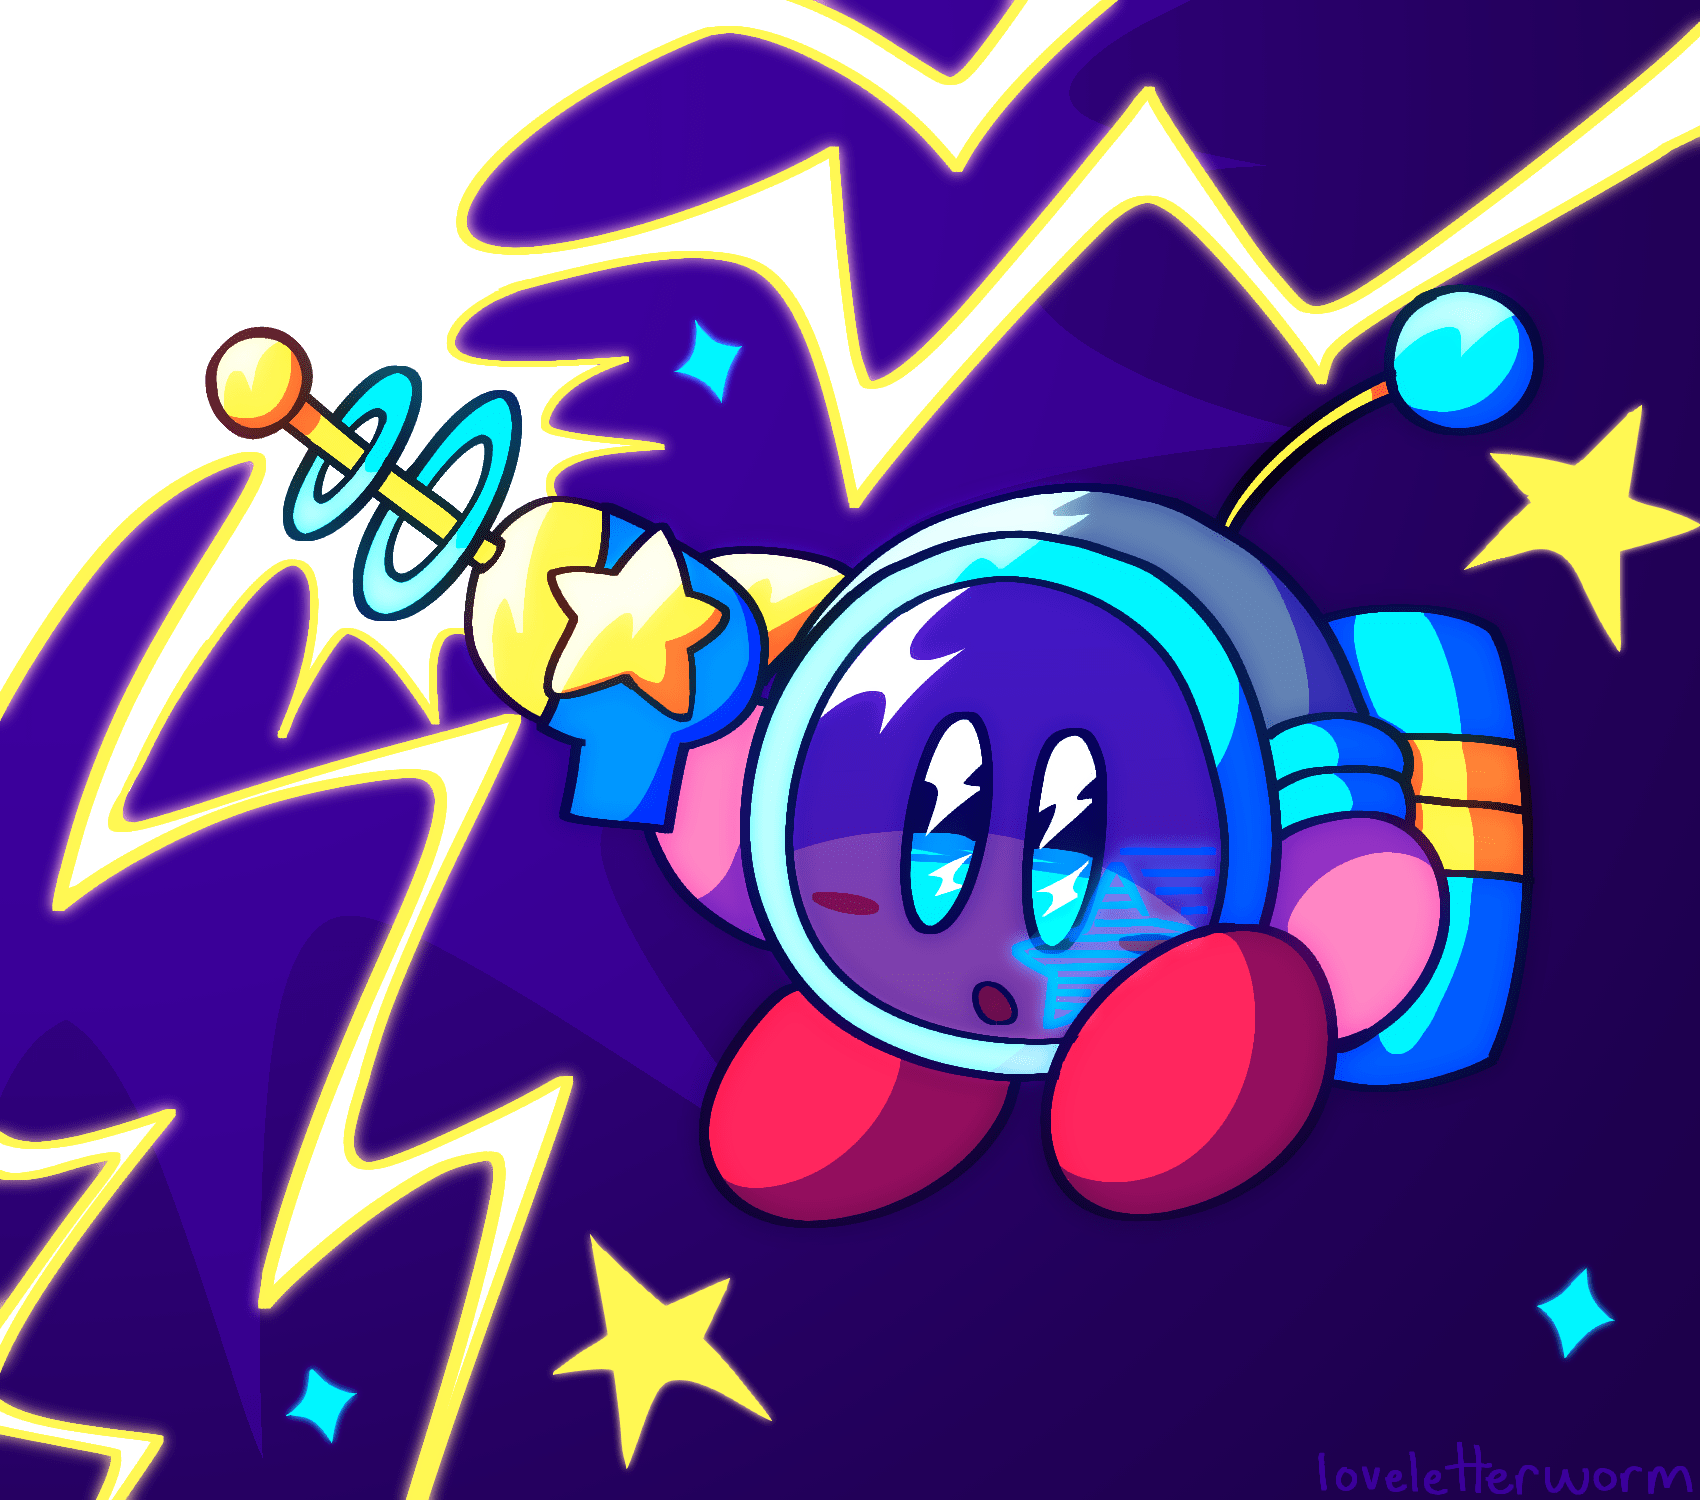 A drawing of Kirby from the Nintendo games. He has the Space Ranger ability, which gives him a grey and blue space helmet and a blue and yellow laser gun. There are small stars surrounding him, and lightning is coming out of the laser gun.